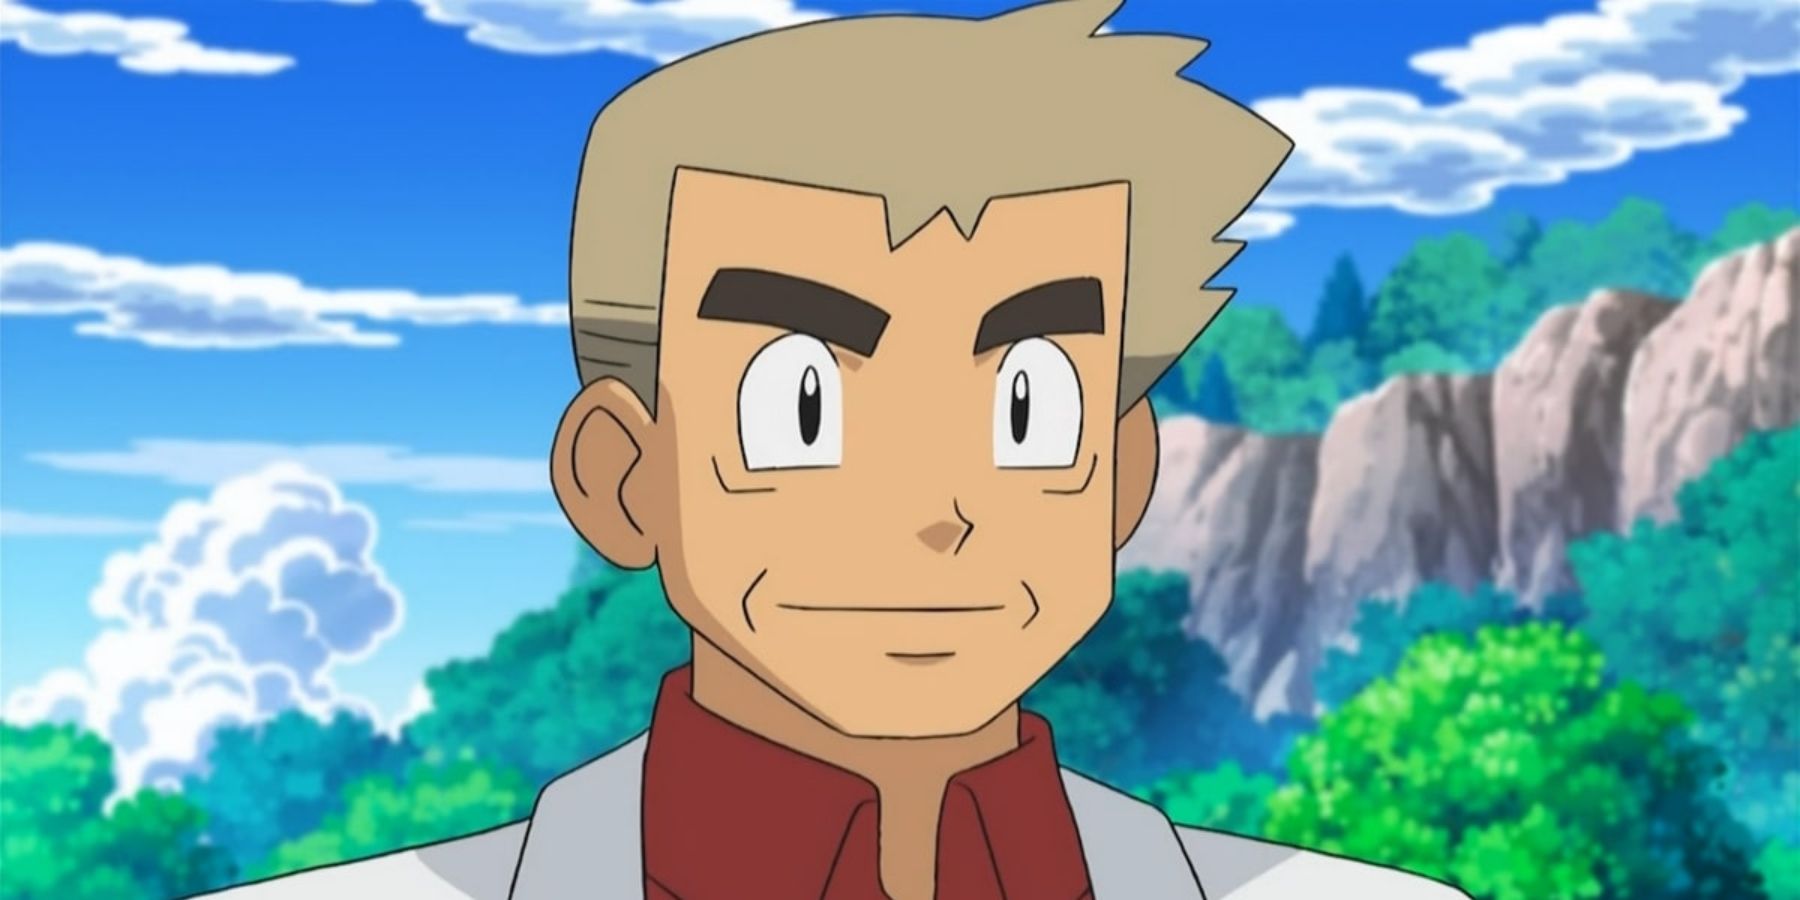 Professor Oak from the Pokemon Anime stares forward with a blank face